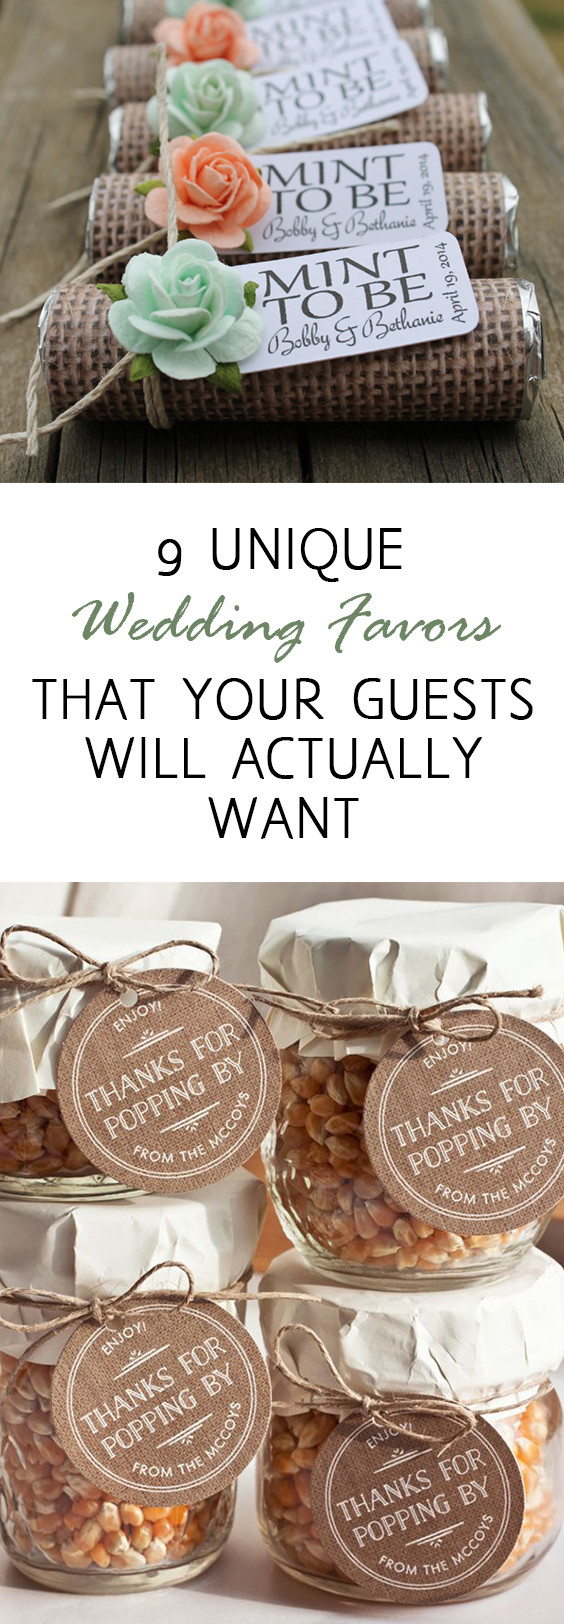 Cheap Wedding Favors Ideas
 9 Unique Wedding Favors that Your Guests Will Actually